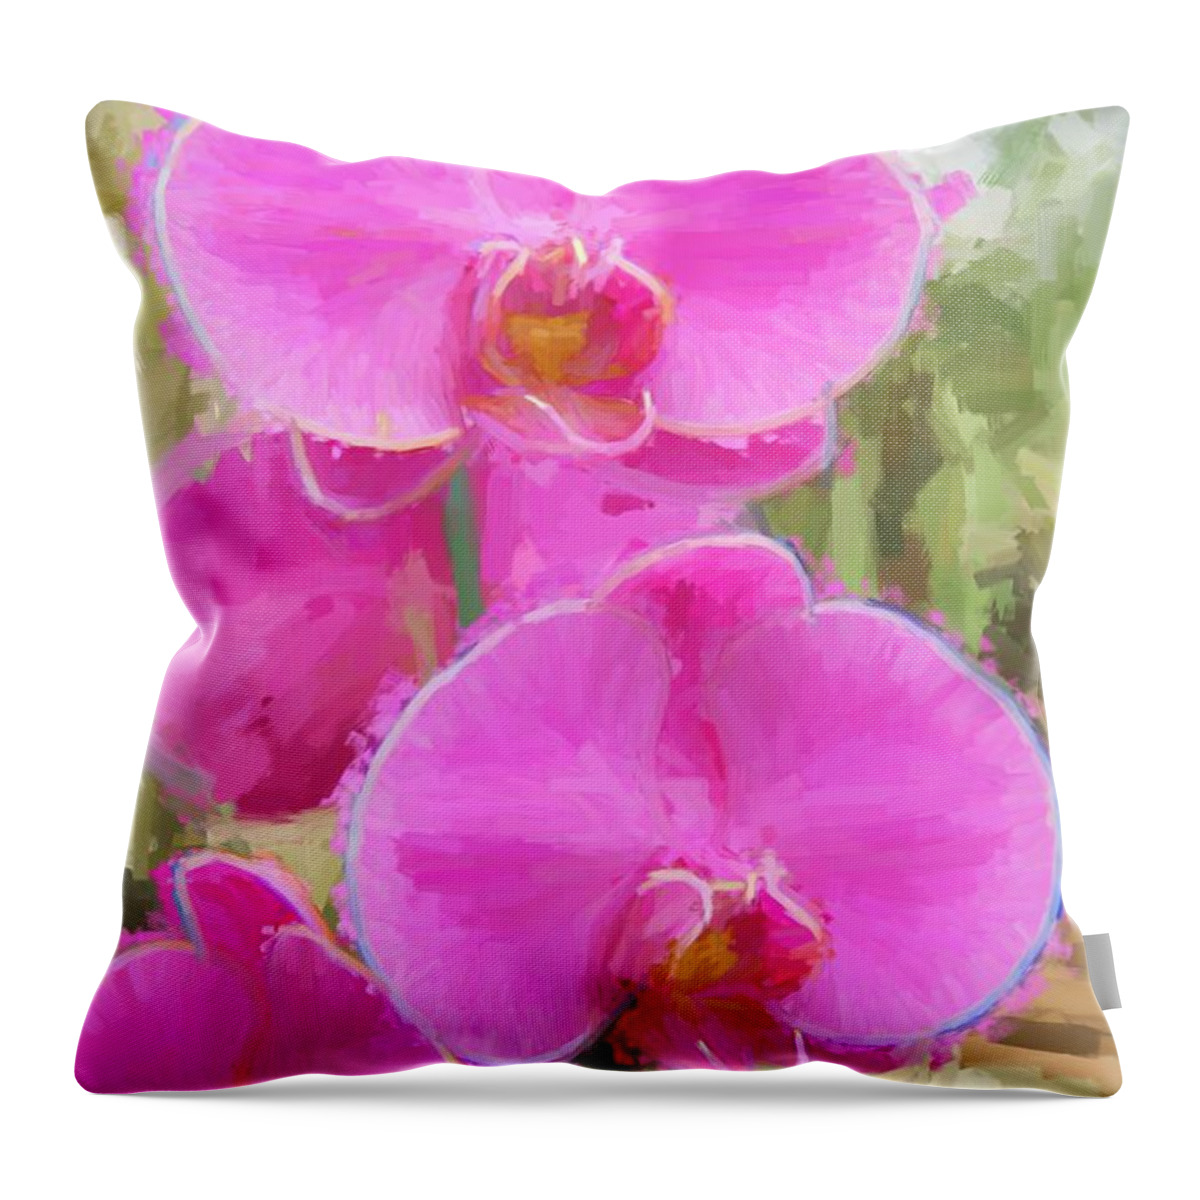 Orchid Throw Pillow featuring the photograph Pretty In Pink by Kathy Bassett